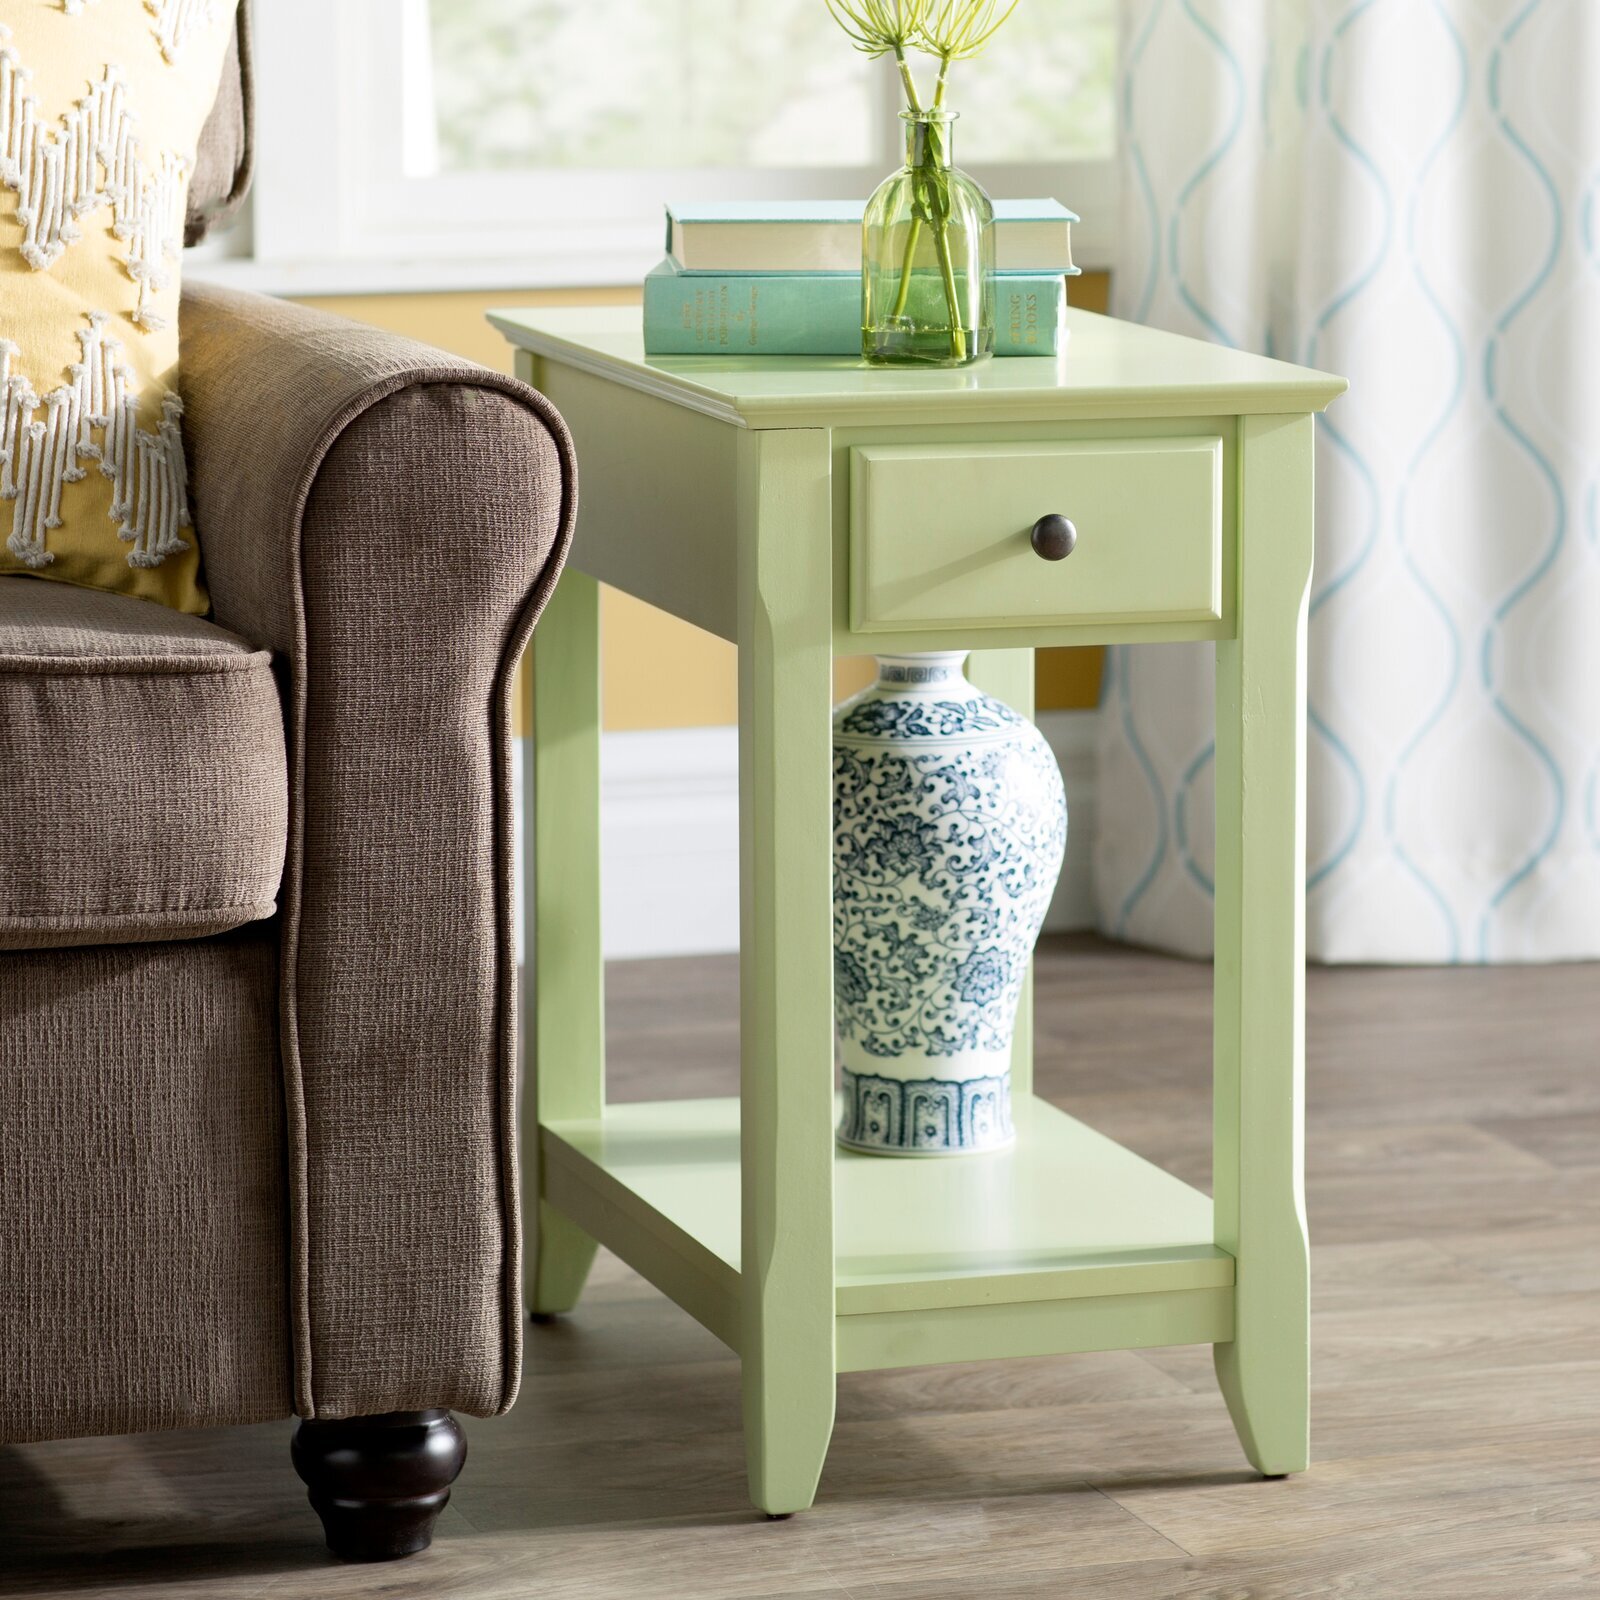 Farmhouse chic 9 inch wide side table